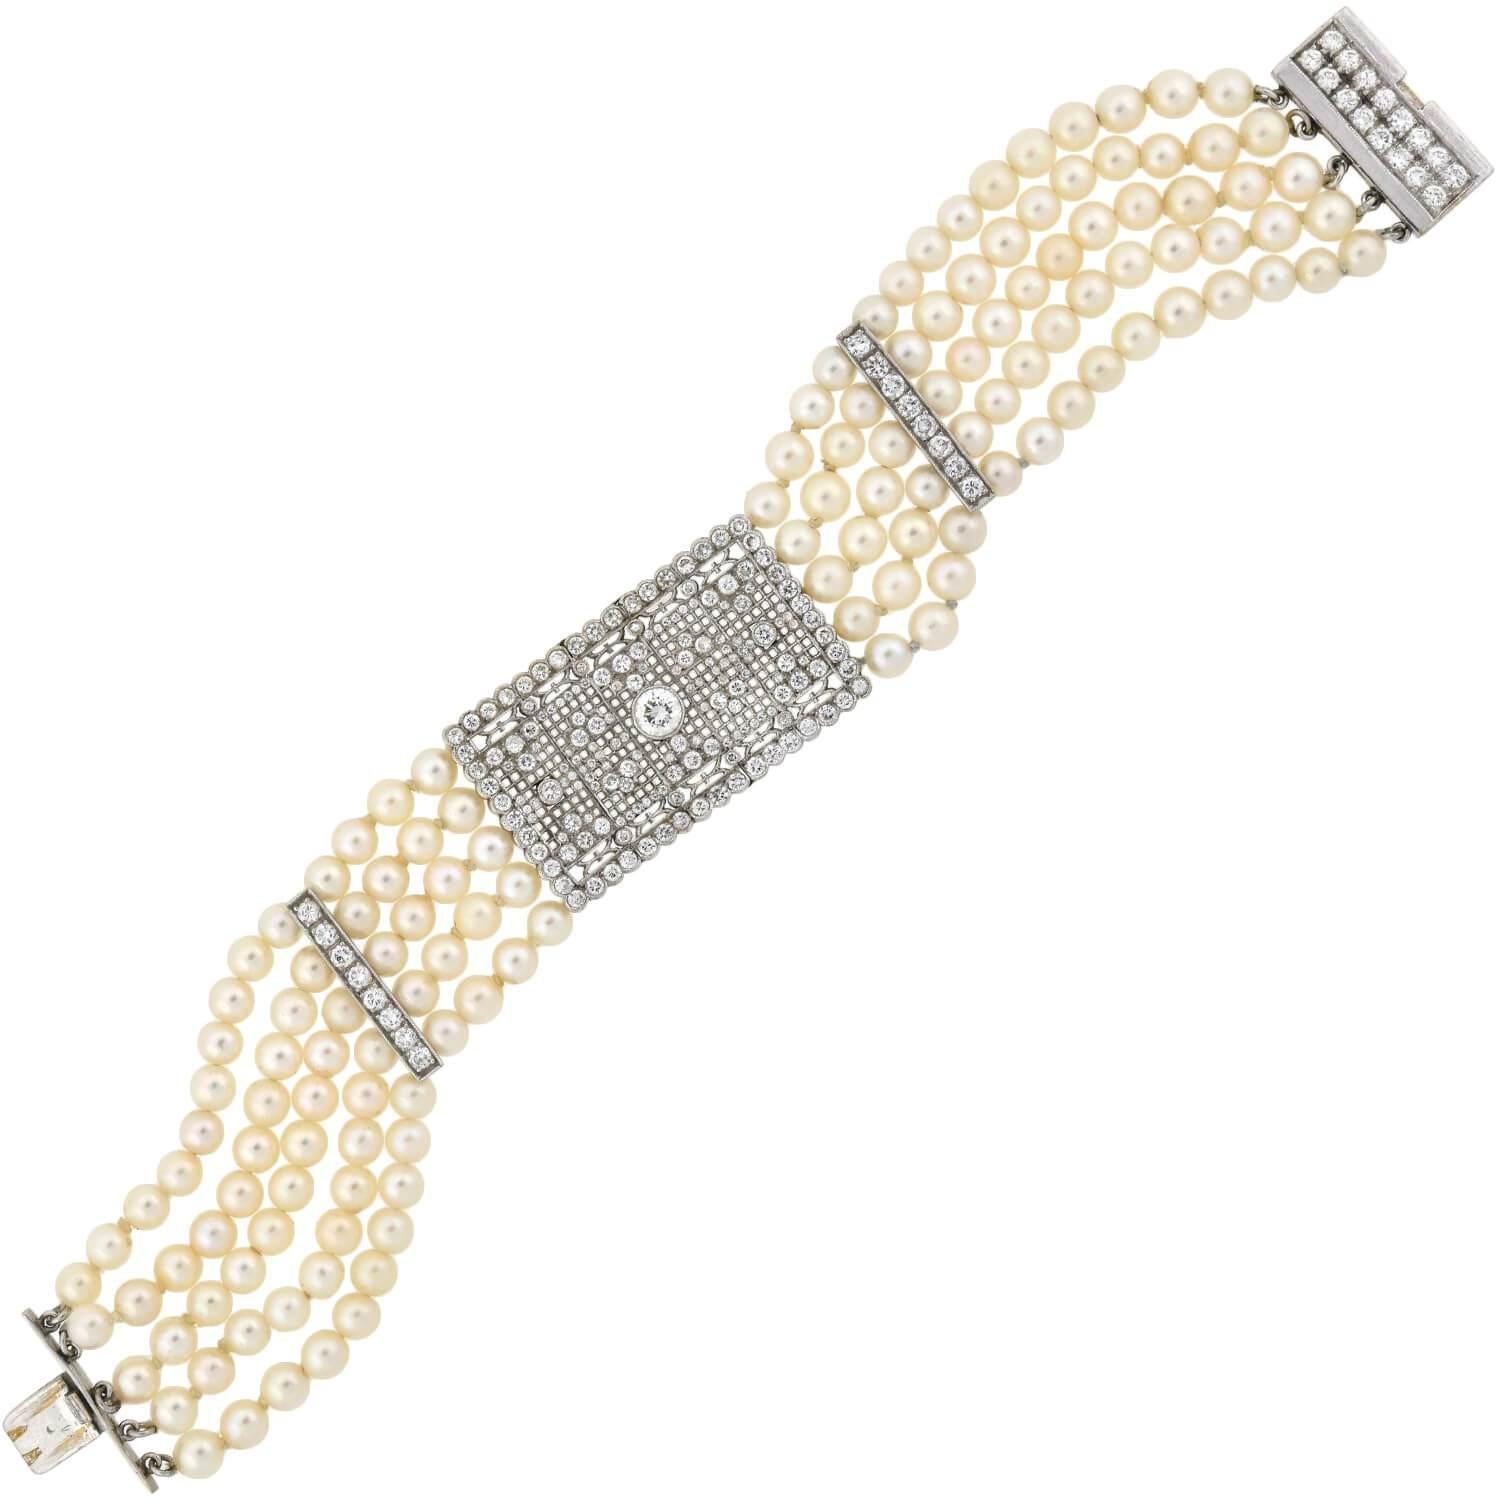 An absolutely lovely pearl bracelet from the late Art Deco (1930s) era! This stunning piece is comprised of five strands of delicate cultured pearls, which have a rich creamy color and beautiful luster. An open wirework centerpiece, comprised of